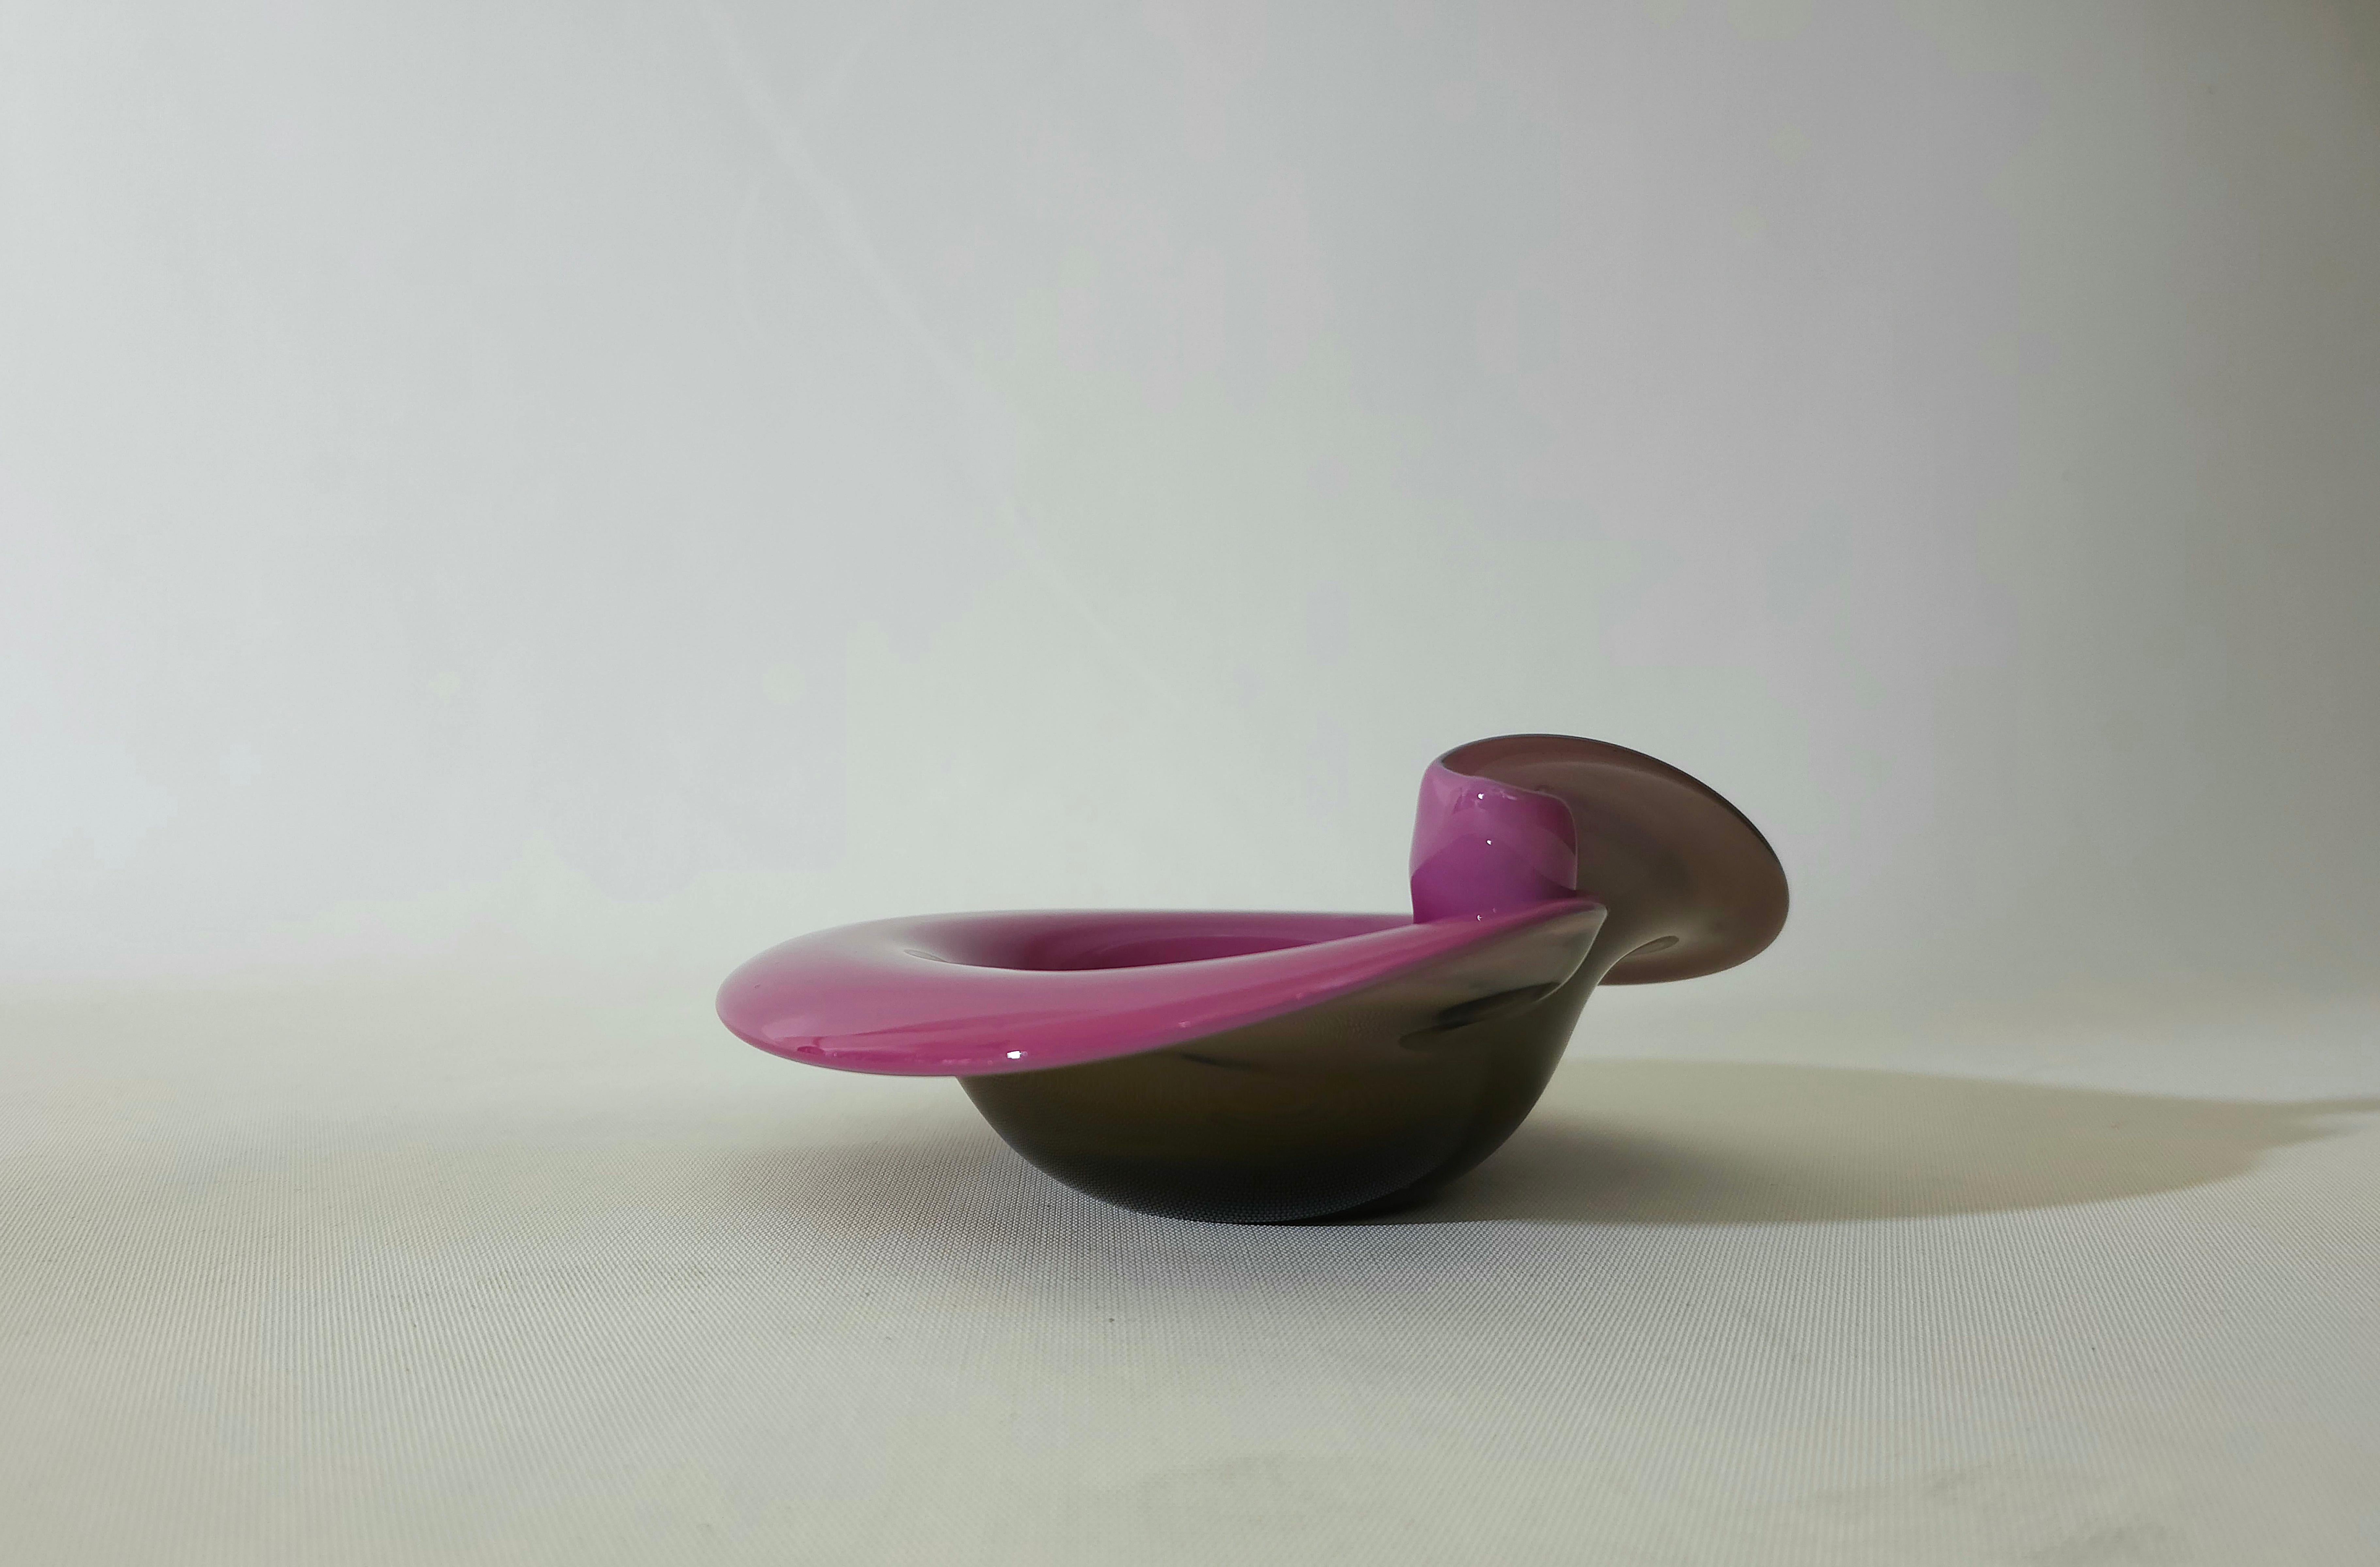 Murano pocket emptier in magenta colour. Almost circular body. On the underside it has a dove gray colour. Elegant object, with modest dimensions and bright colour. Intact.

Weight: 770 grams

Note: We try to offer our customers an excellent service